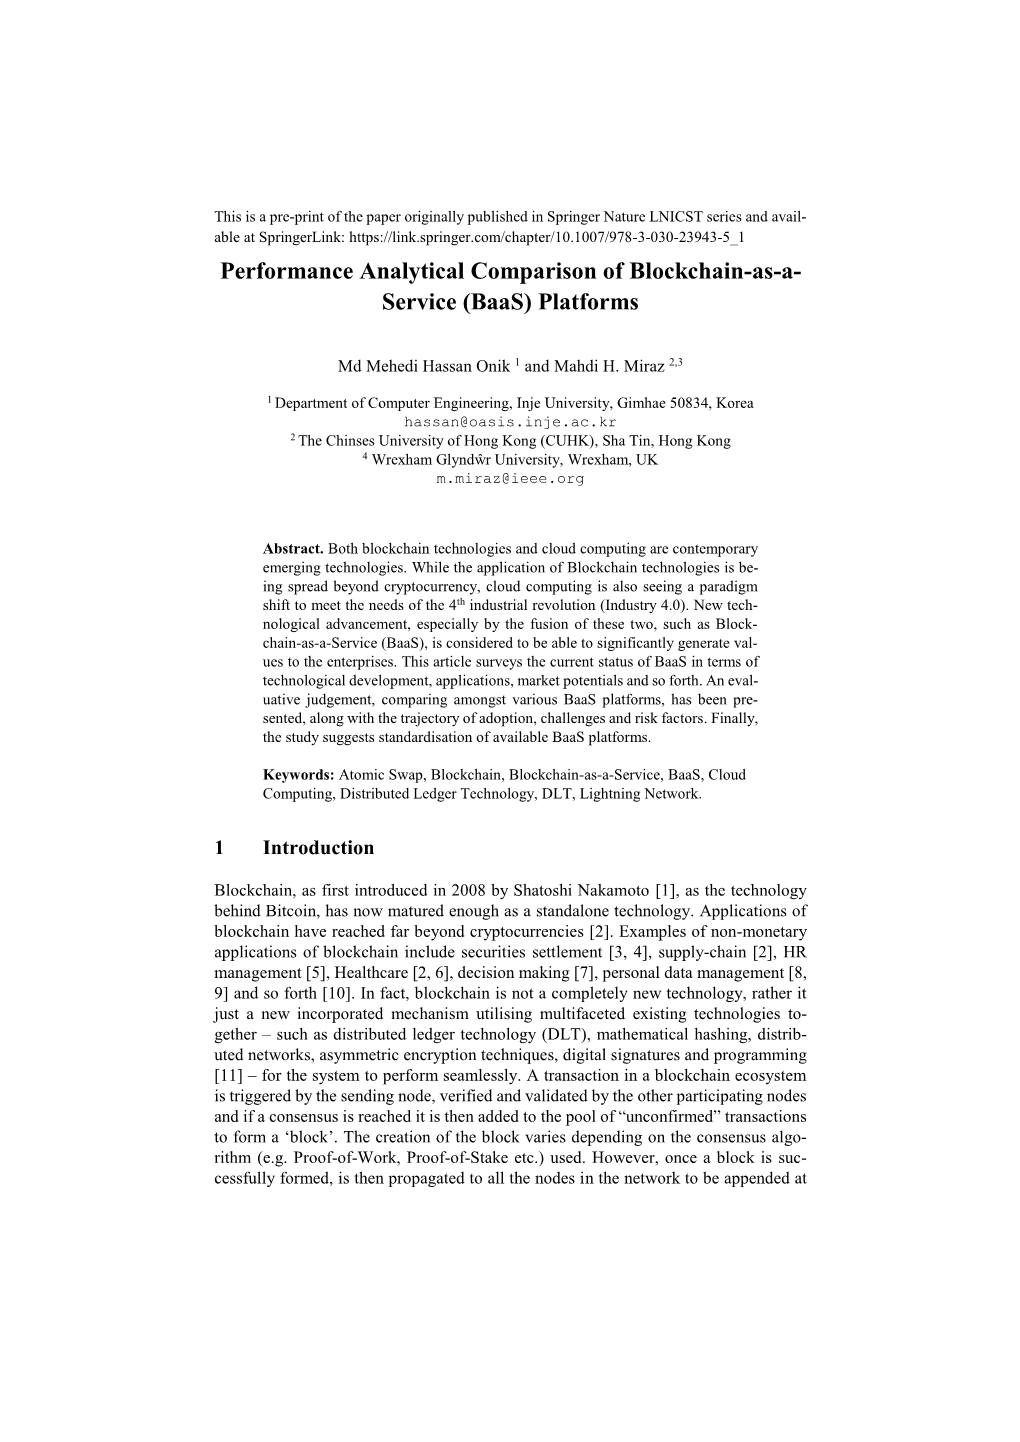 Performance Analytical Comparison of Blockchain-As-A- Service (Baas) Platforms